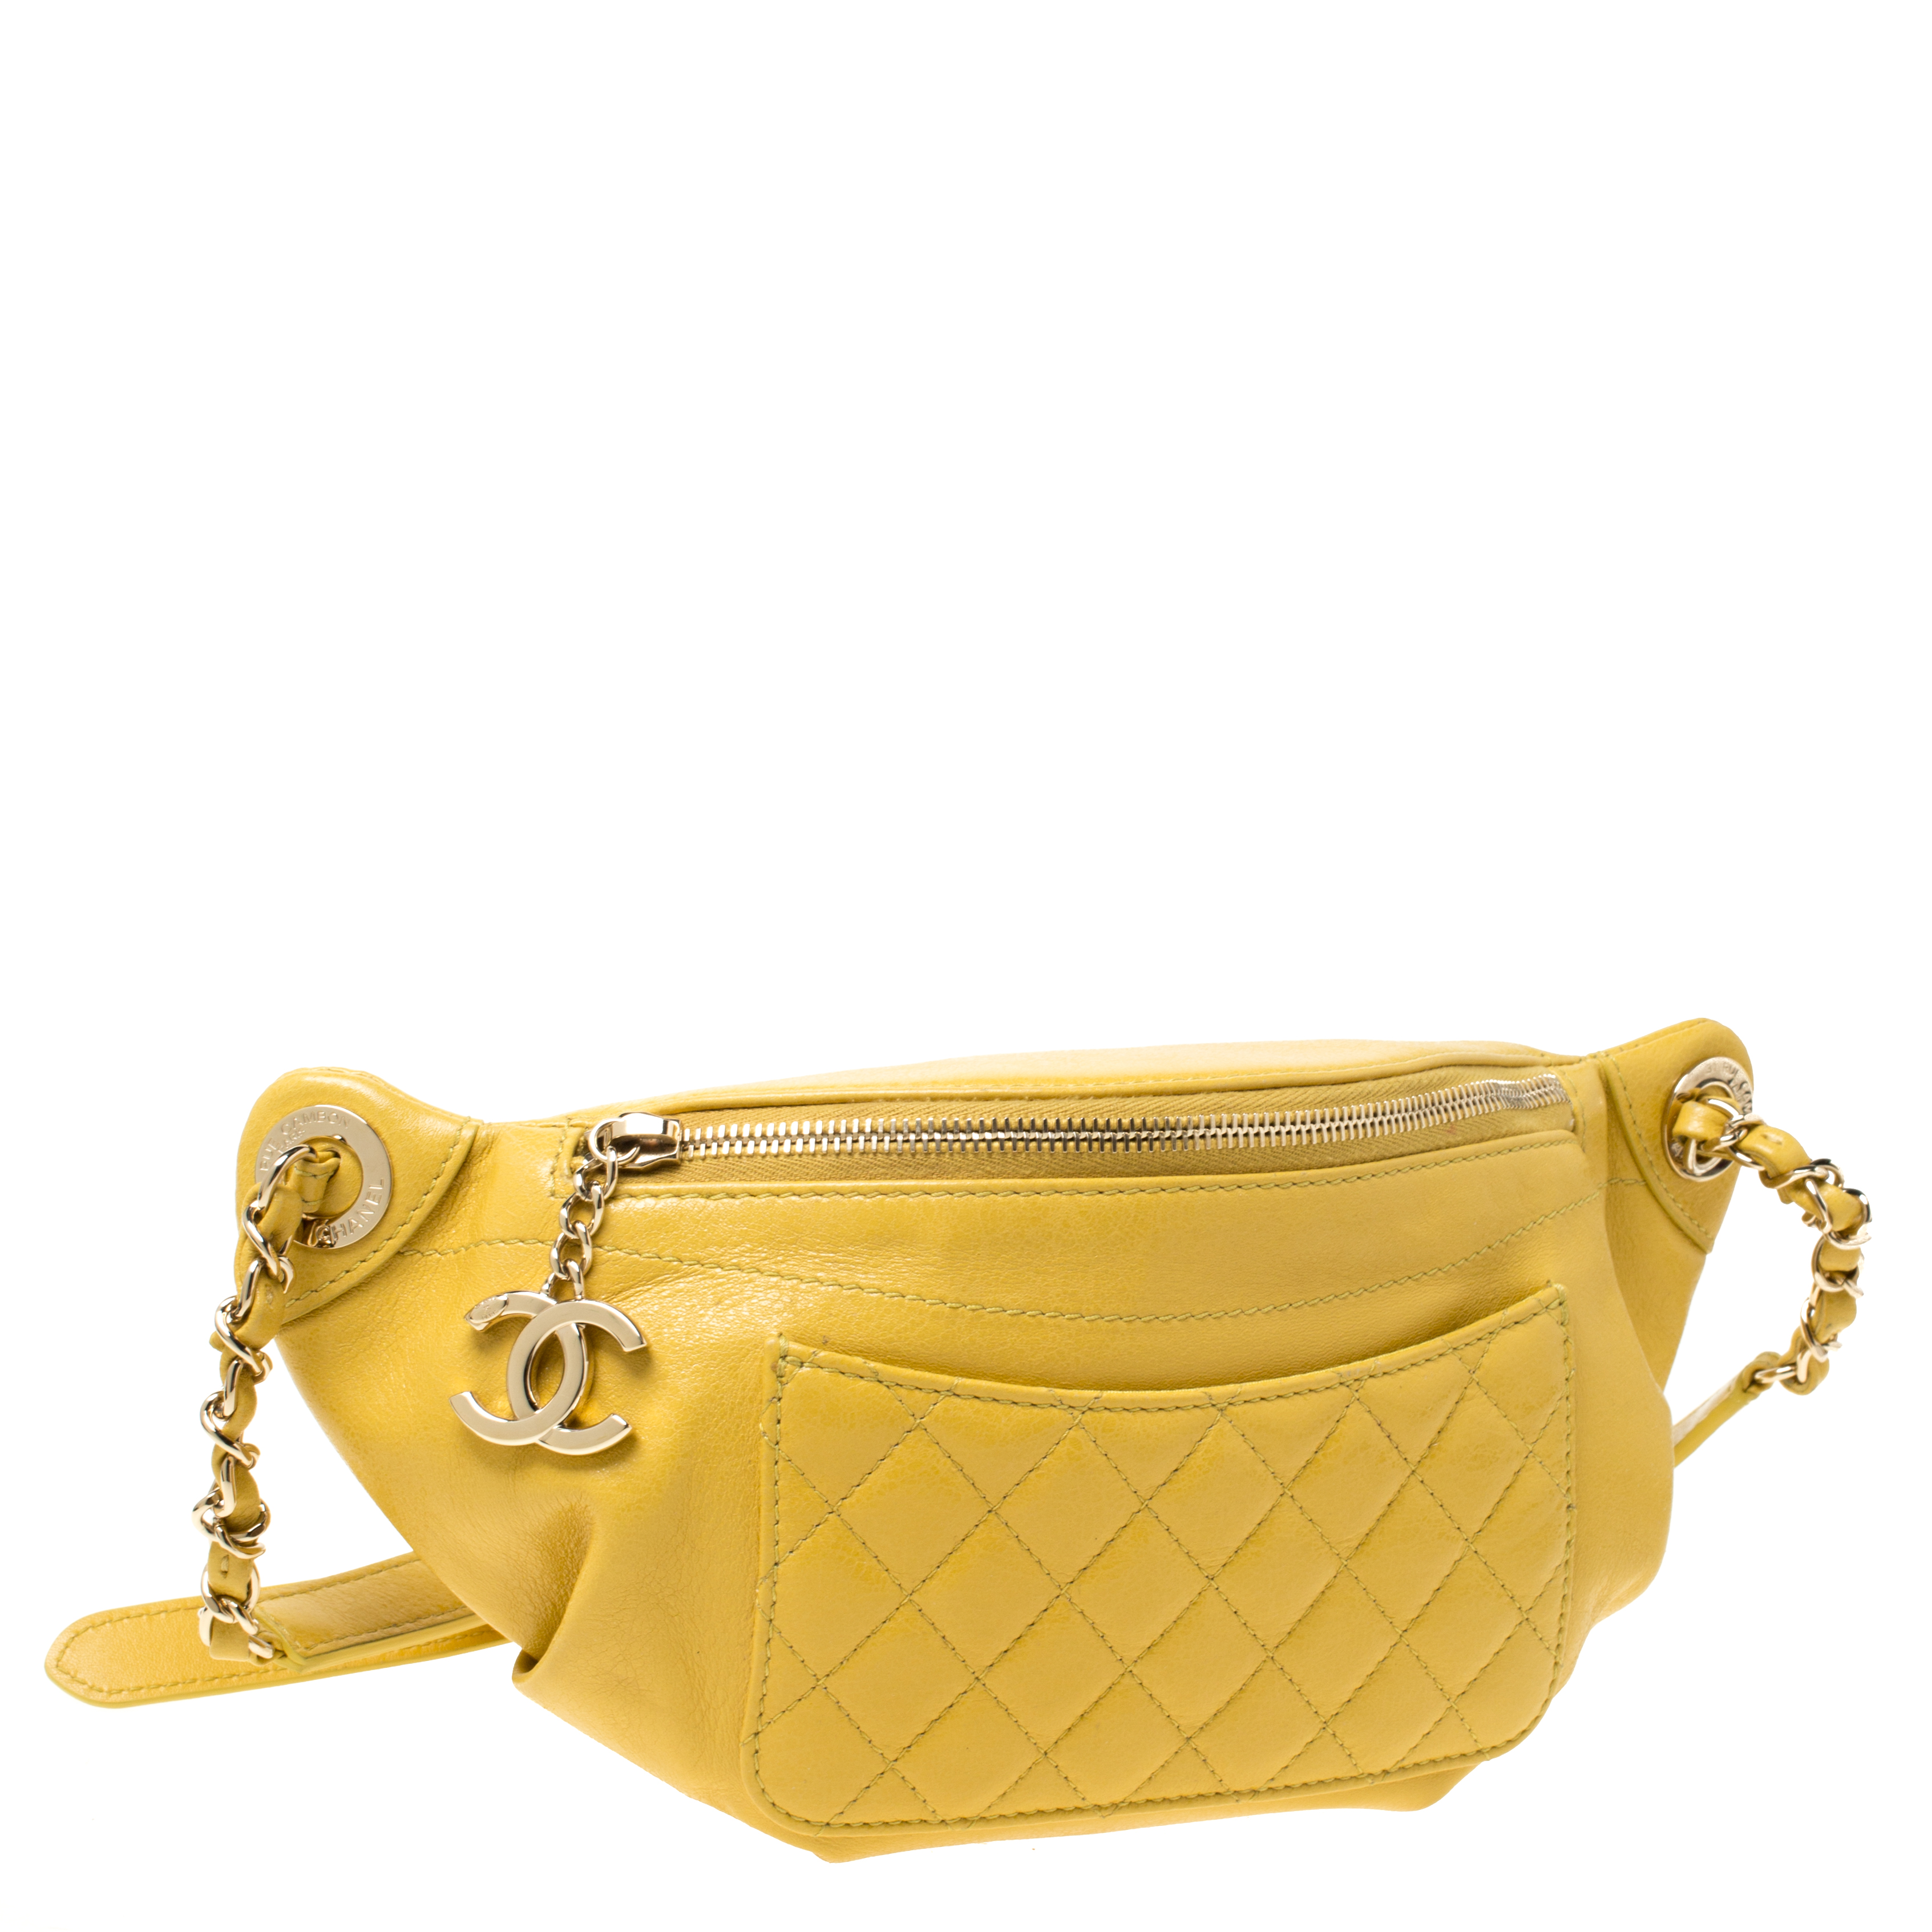 Chanel Yellow Quilted Leather Fanny Pack Waistbelt Bag Chanel | TLC